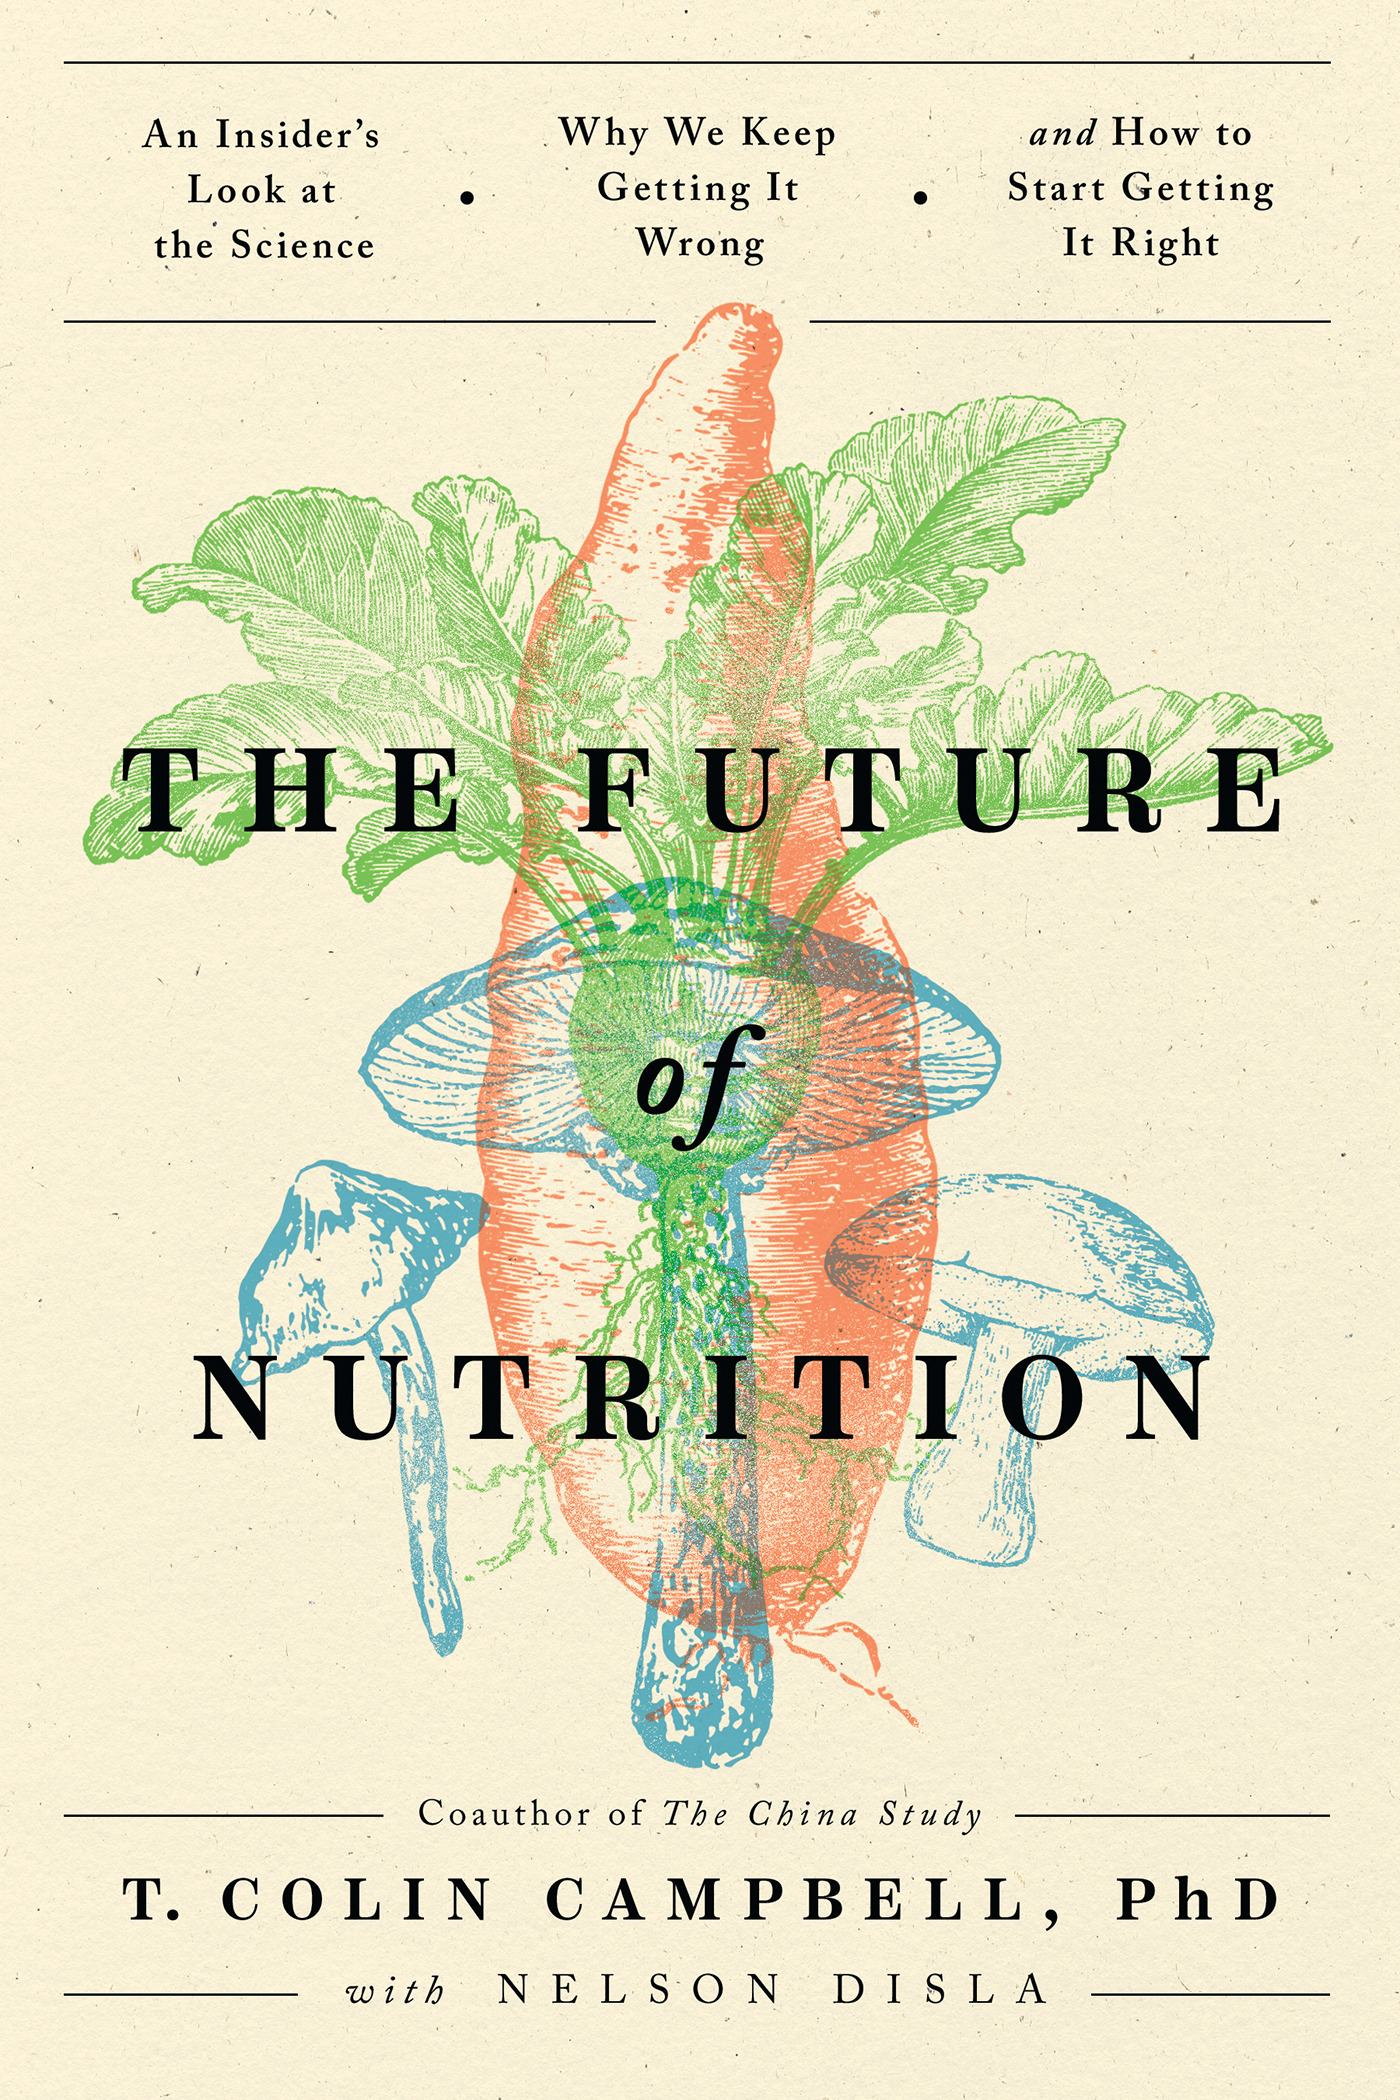 The Future of Nutrition : An Insider's Look at the Science, Why We Keep Getting It Wrong, and How to Start  Getting It Right | Campbell, T. Colin